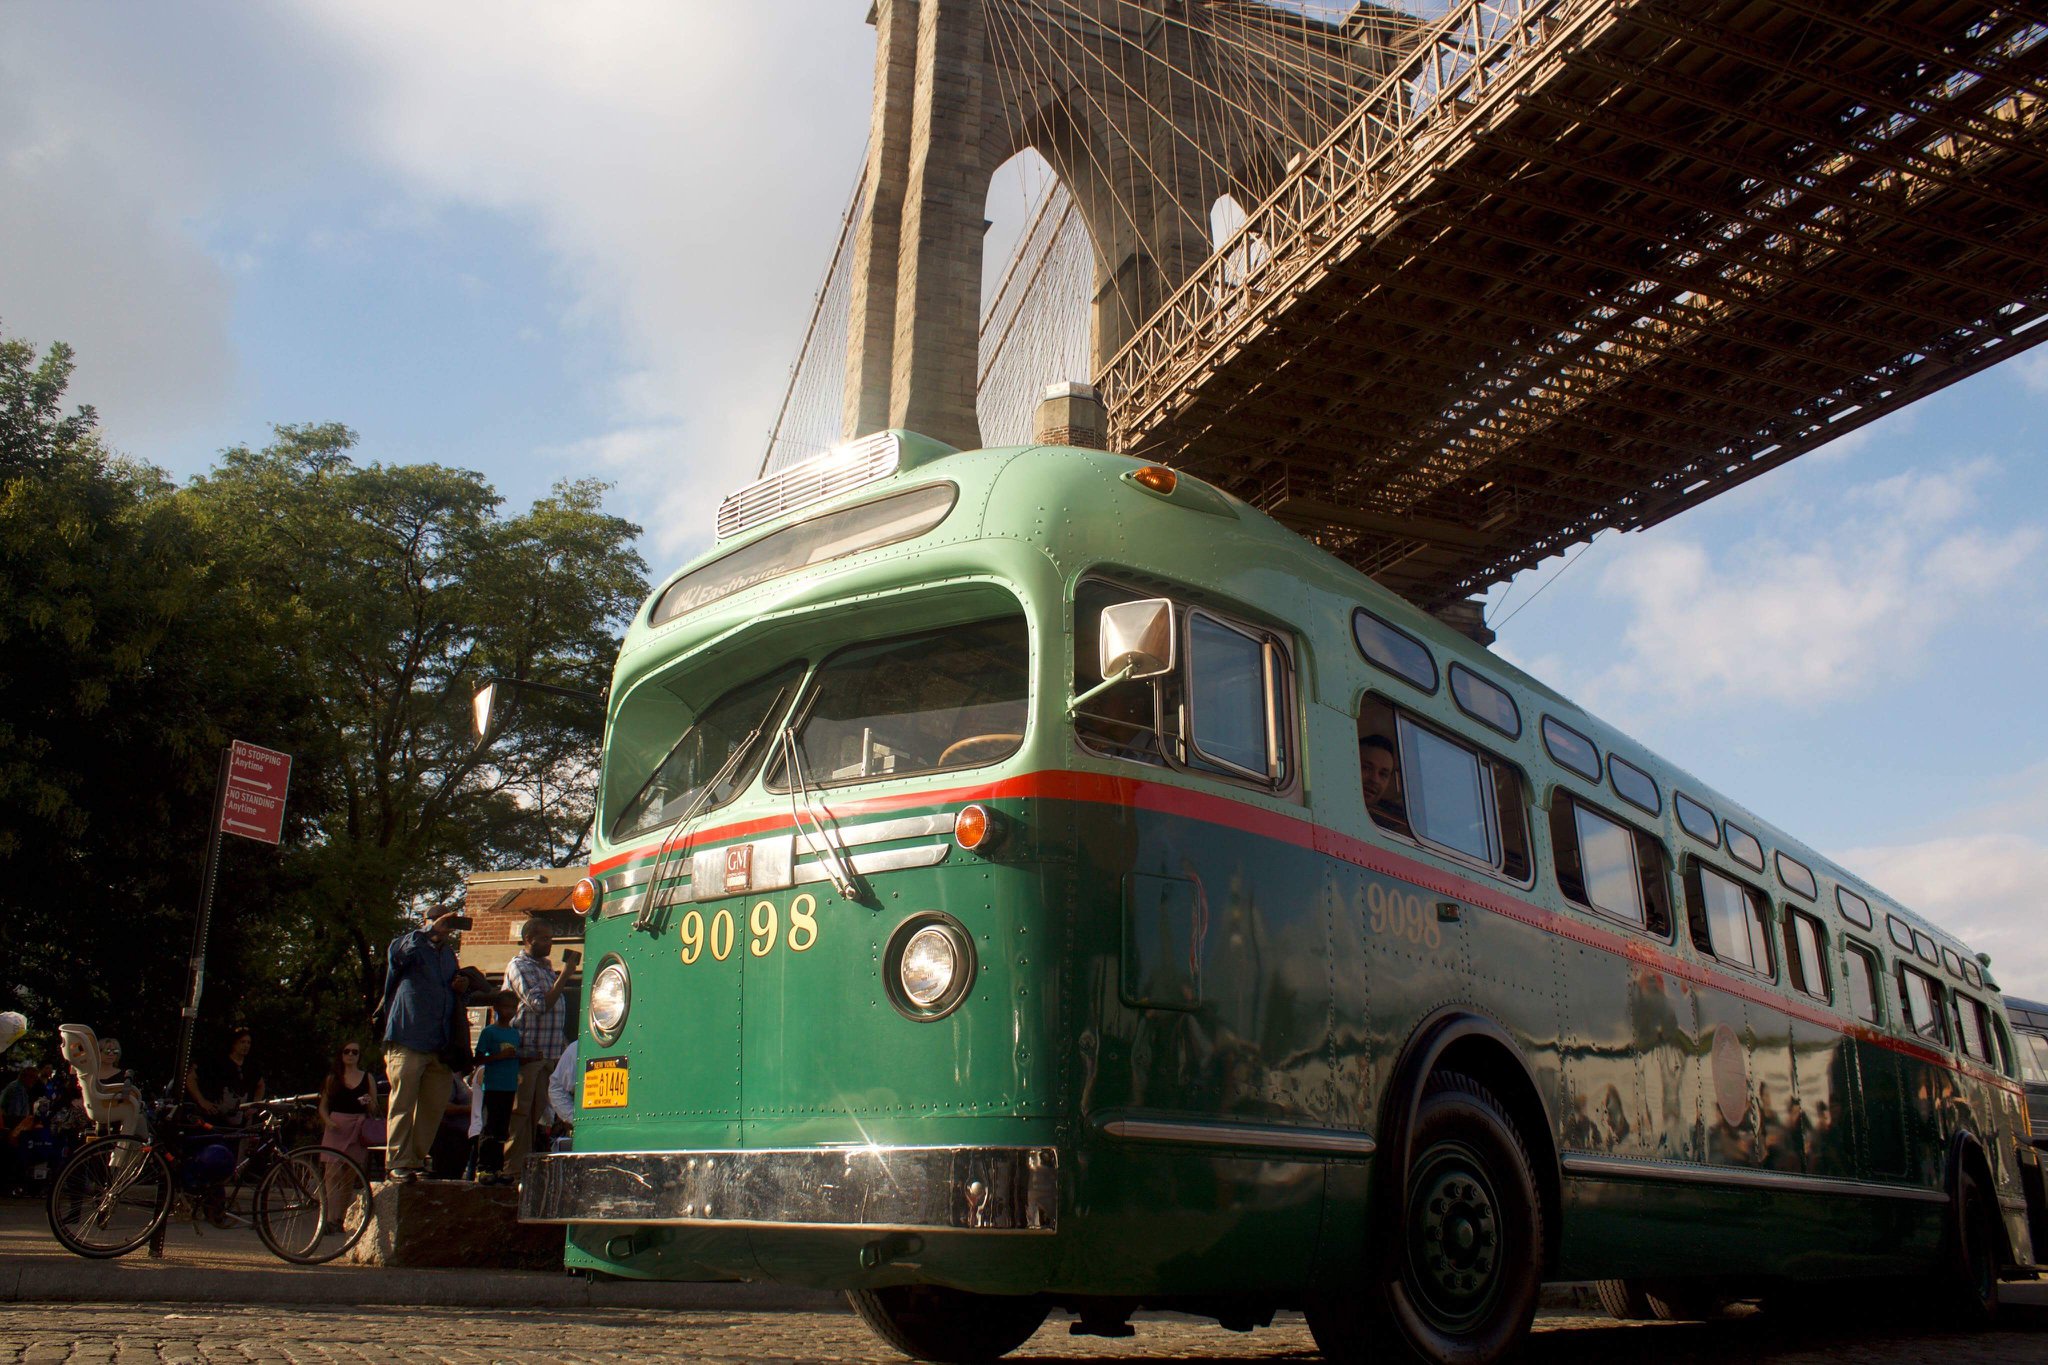 Bus 9098 in front of the Brooklyn Bridge at Bus Festival in 2018